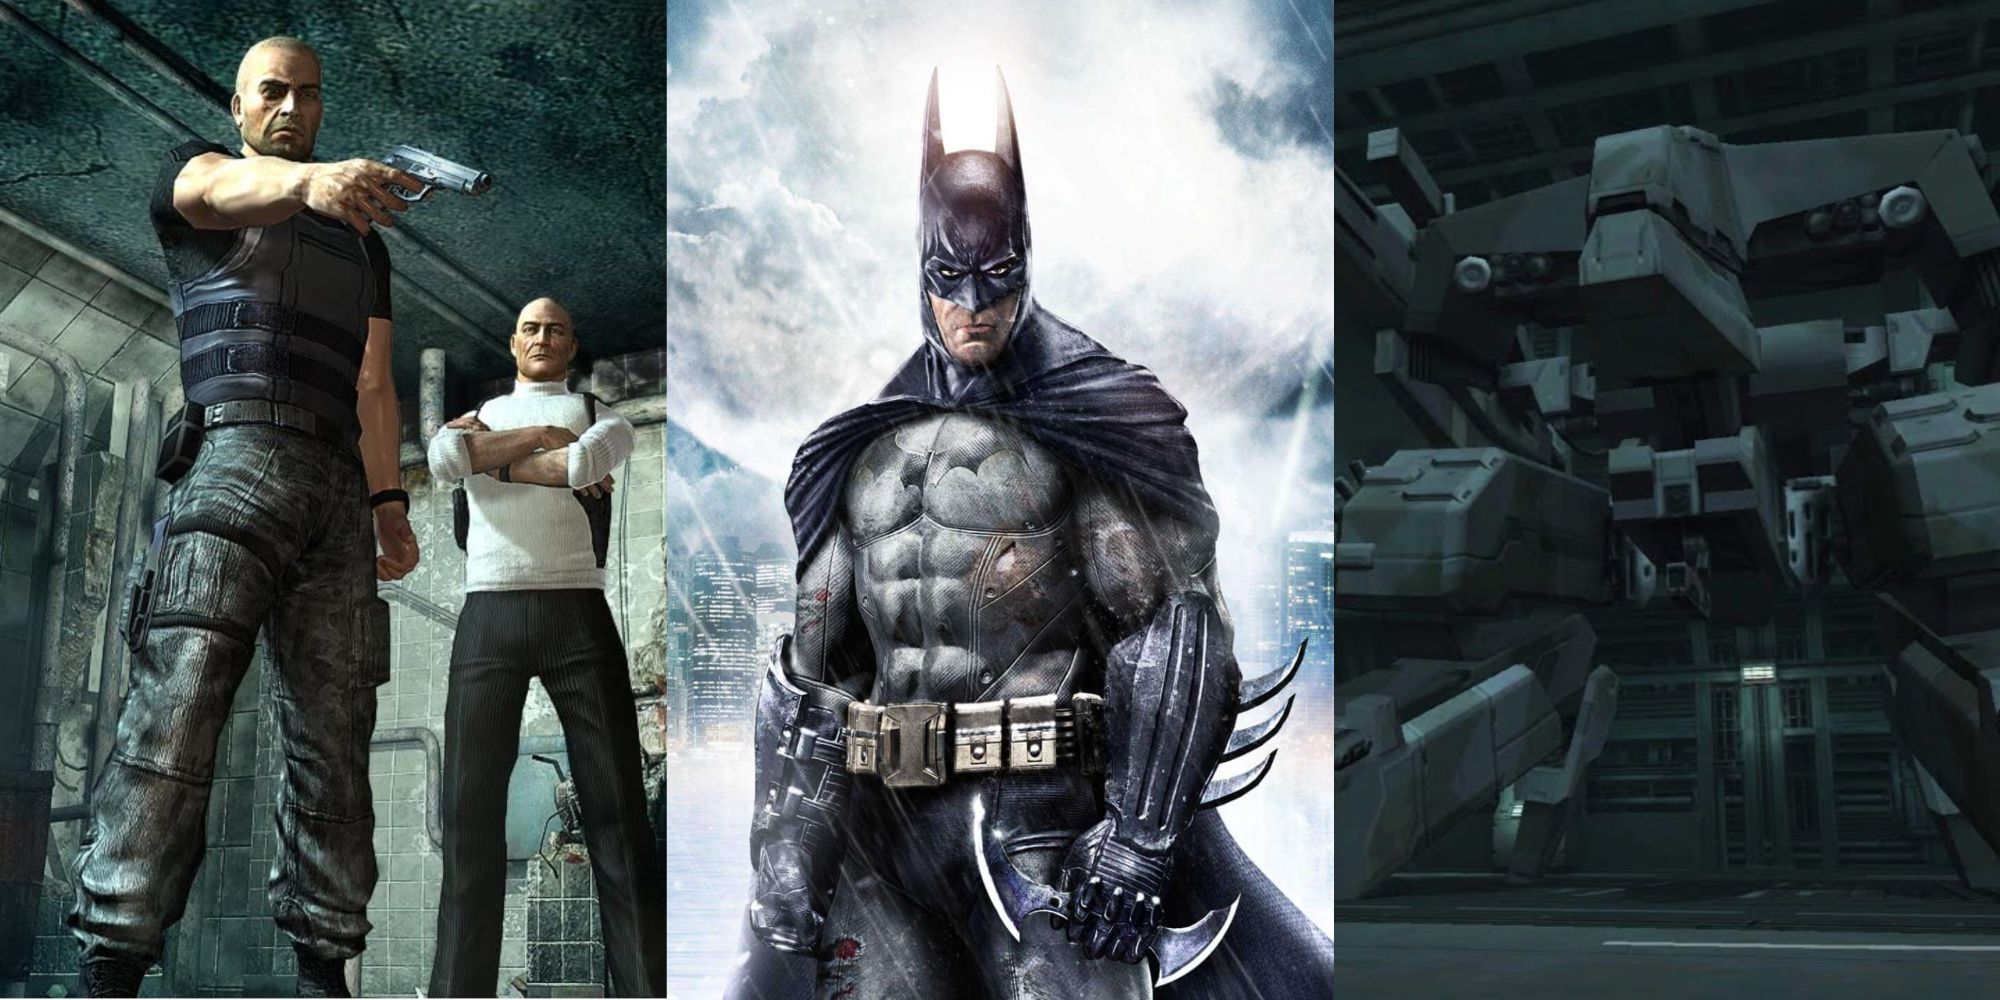 A collage showing Splinter Cell Double Agent, Batman Arkham Asylum and Rex from Metal Gear Solid